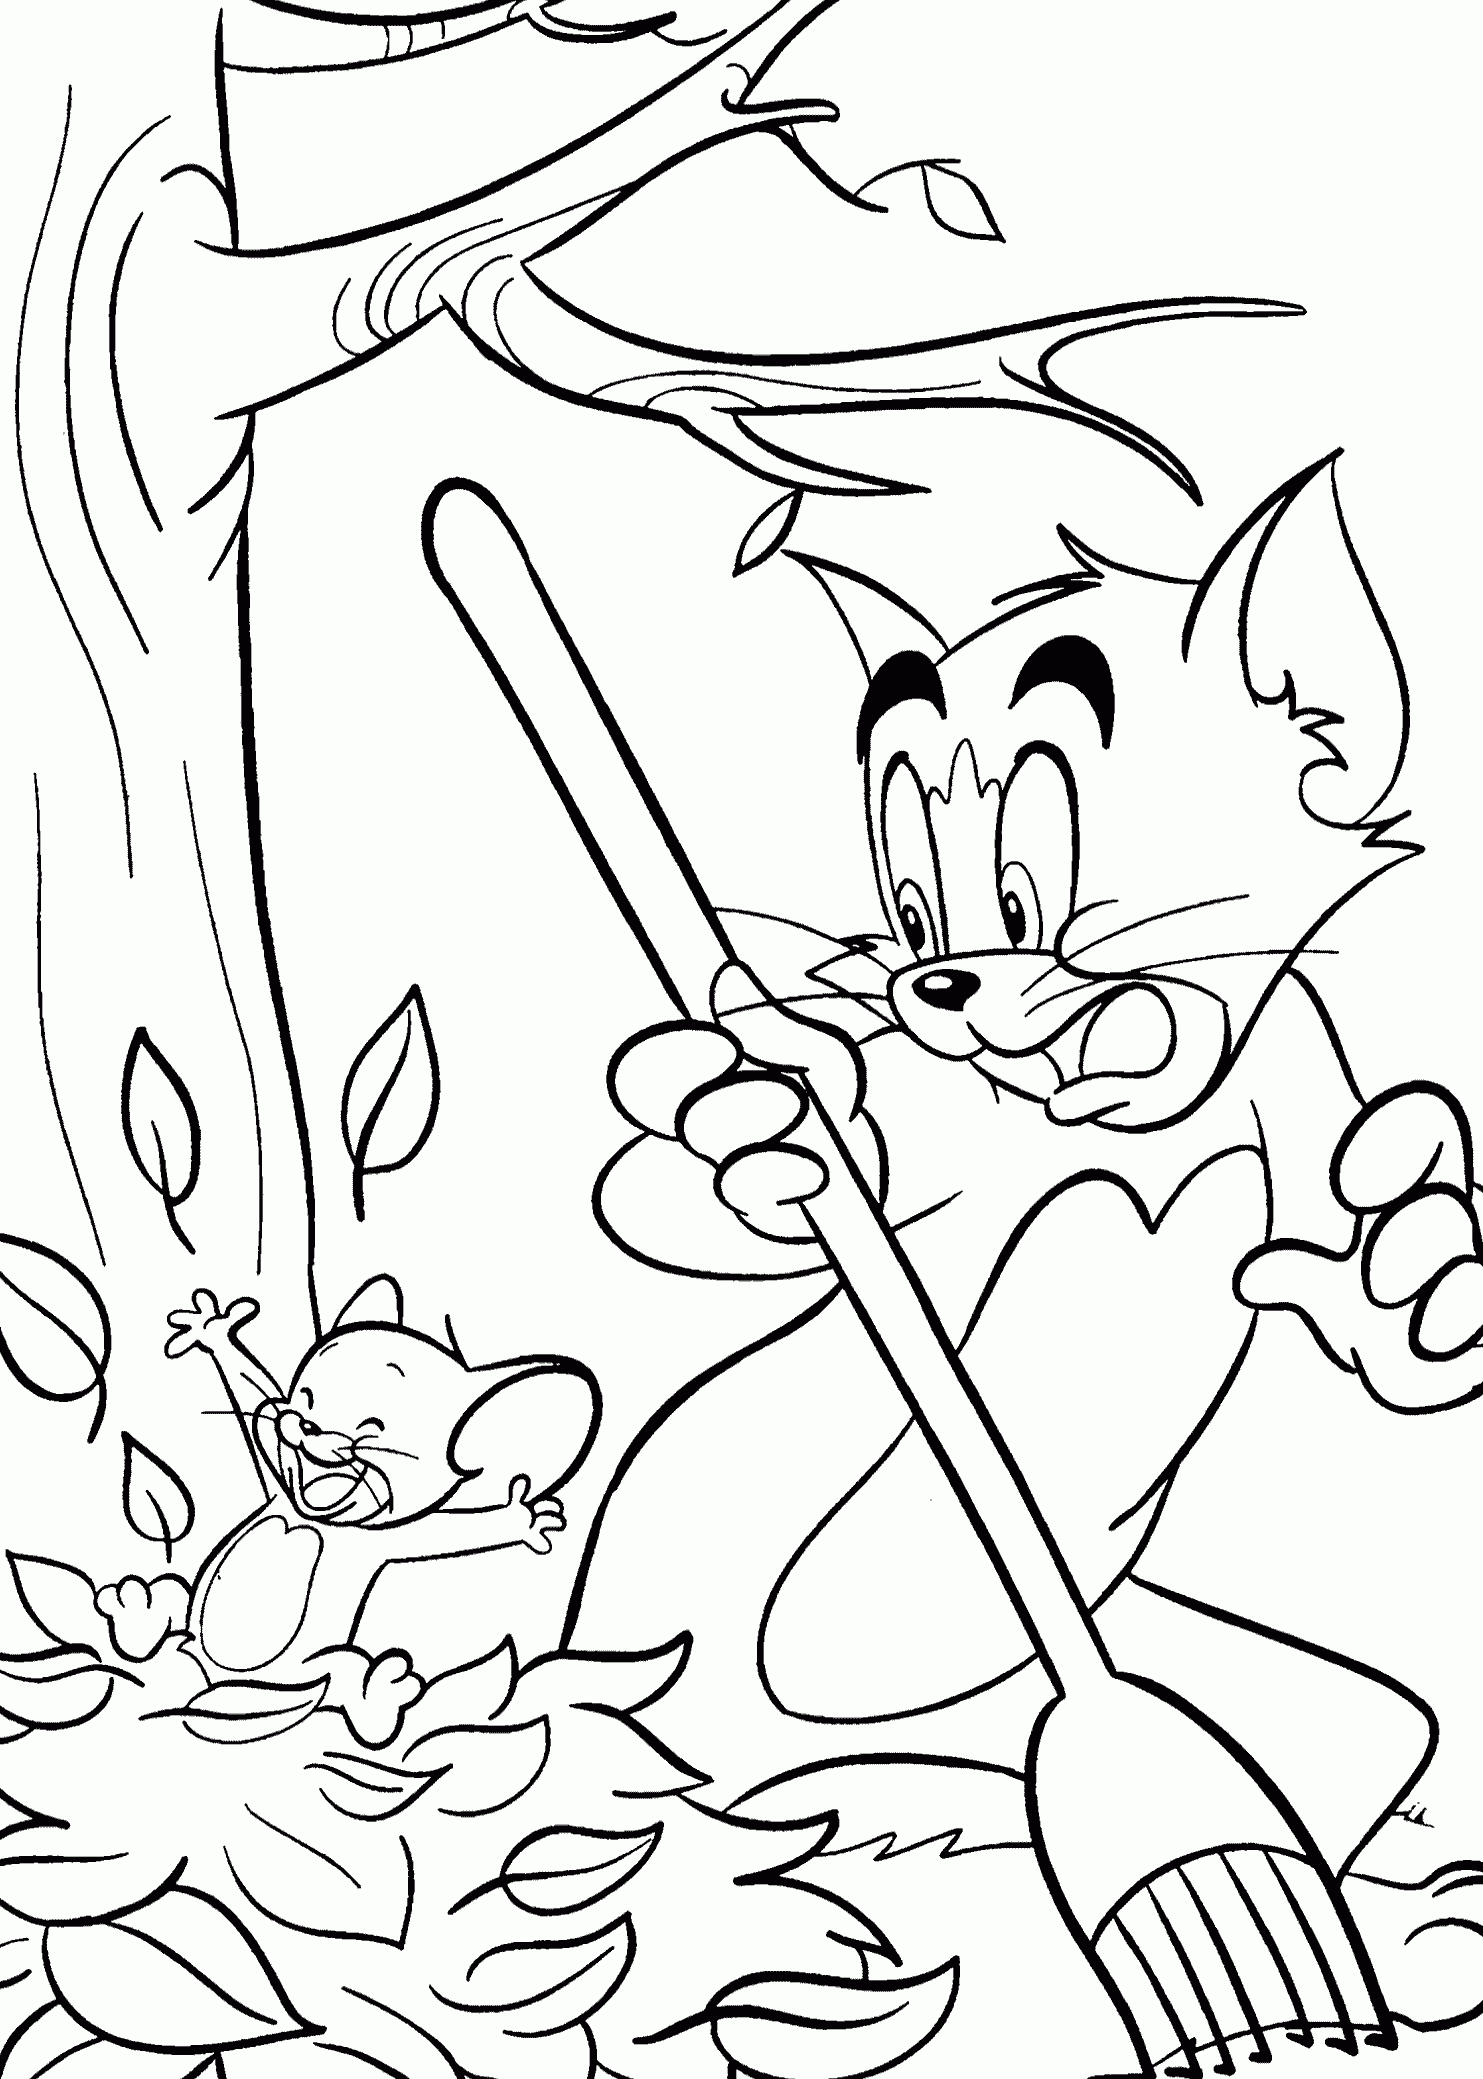 Tom And Jerry Fall Coloring Pages For Kids, Printable Free - Free Printable Tom And Jerry Coloring Pages